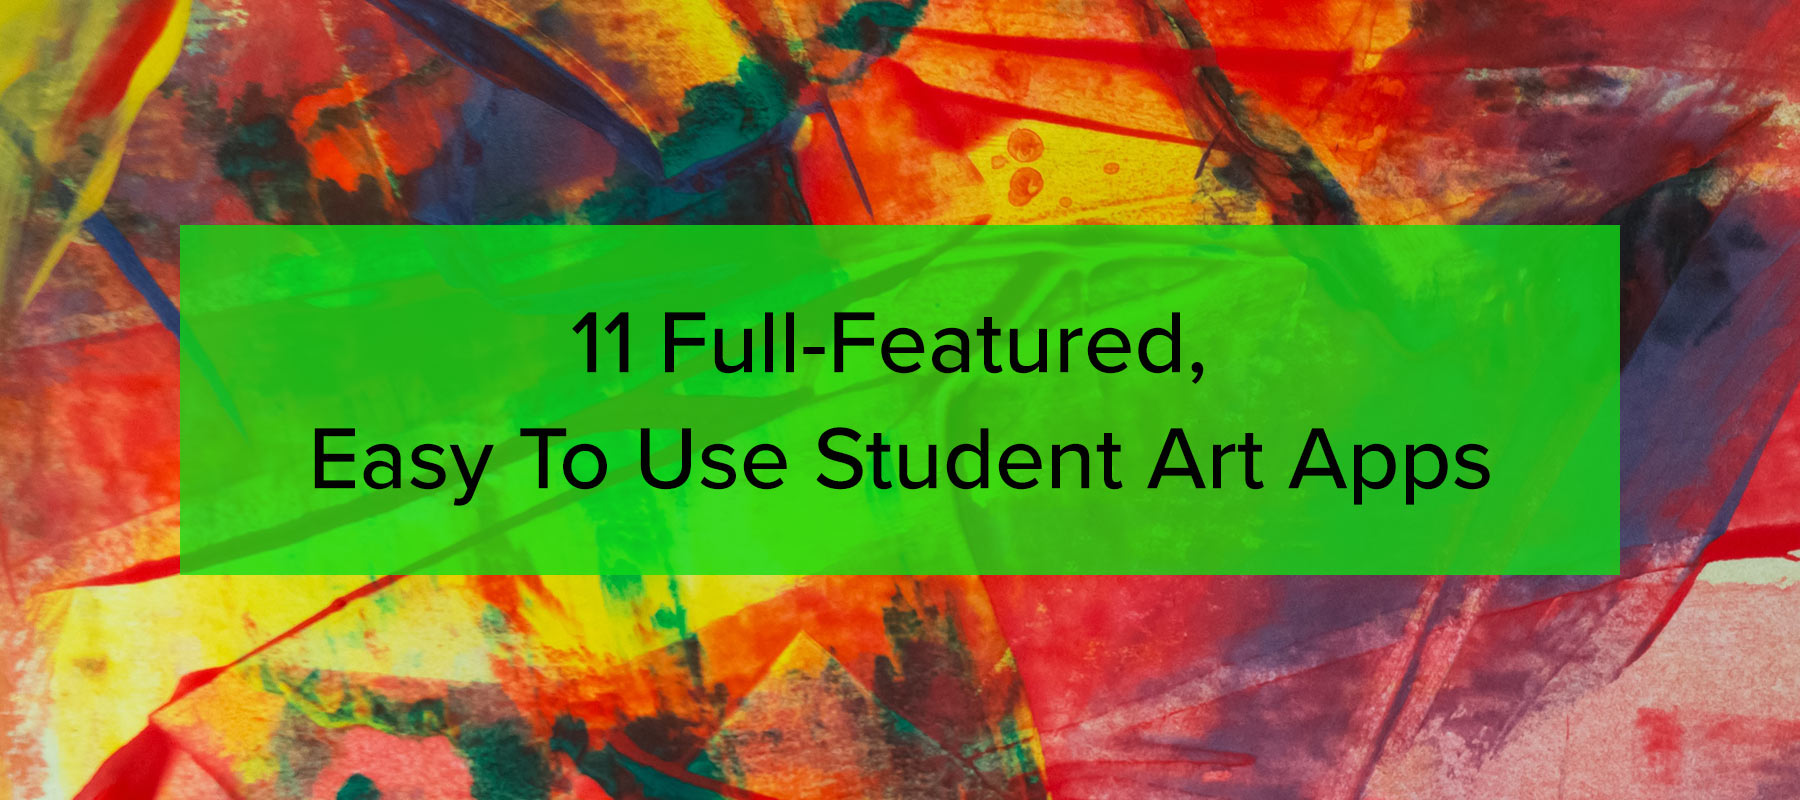 11 Full-Featured, Easy To Use Student Art Apps